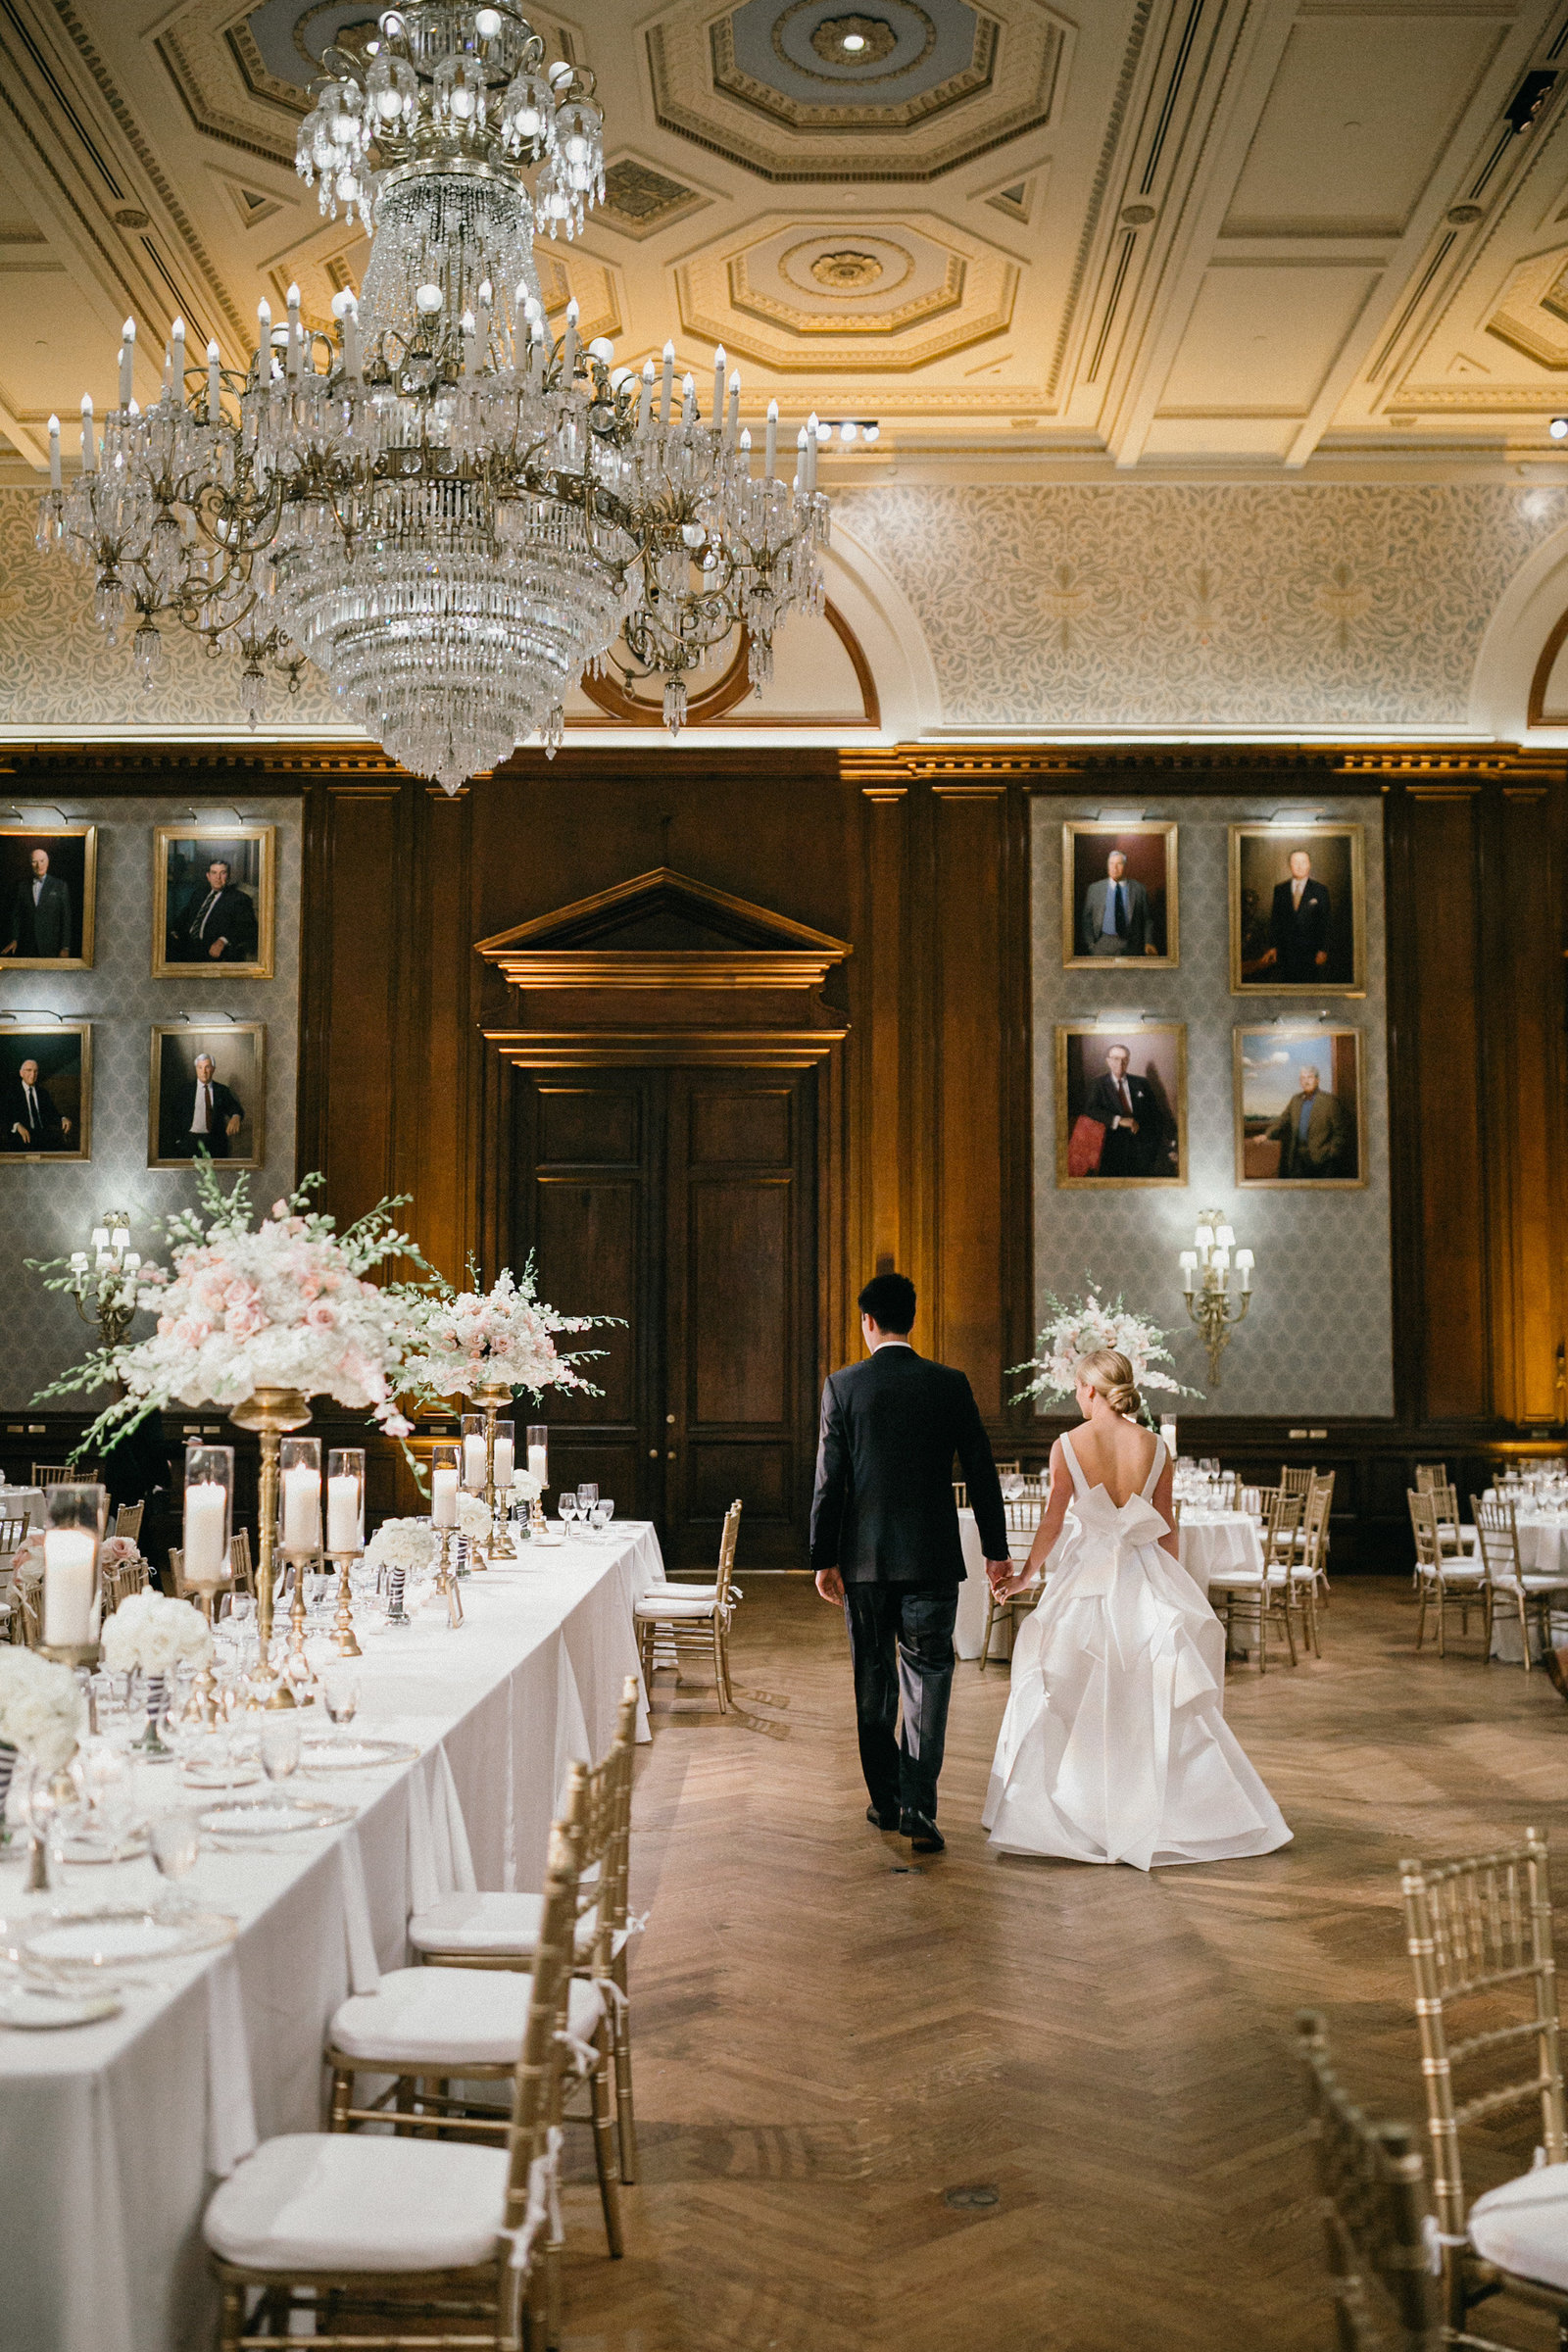 An elegant wedding at Philadelphia's Union League,  planned by Styled Bride.